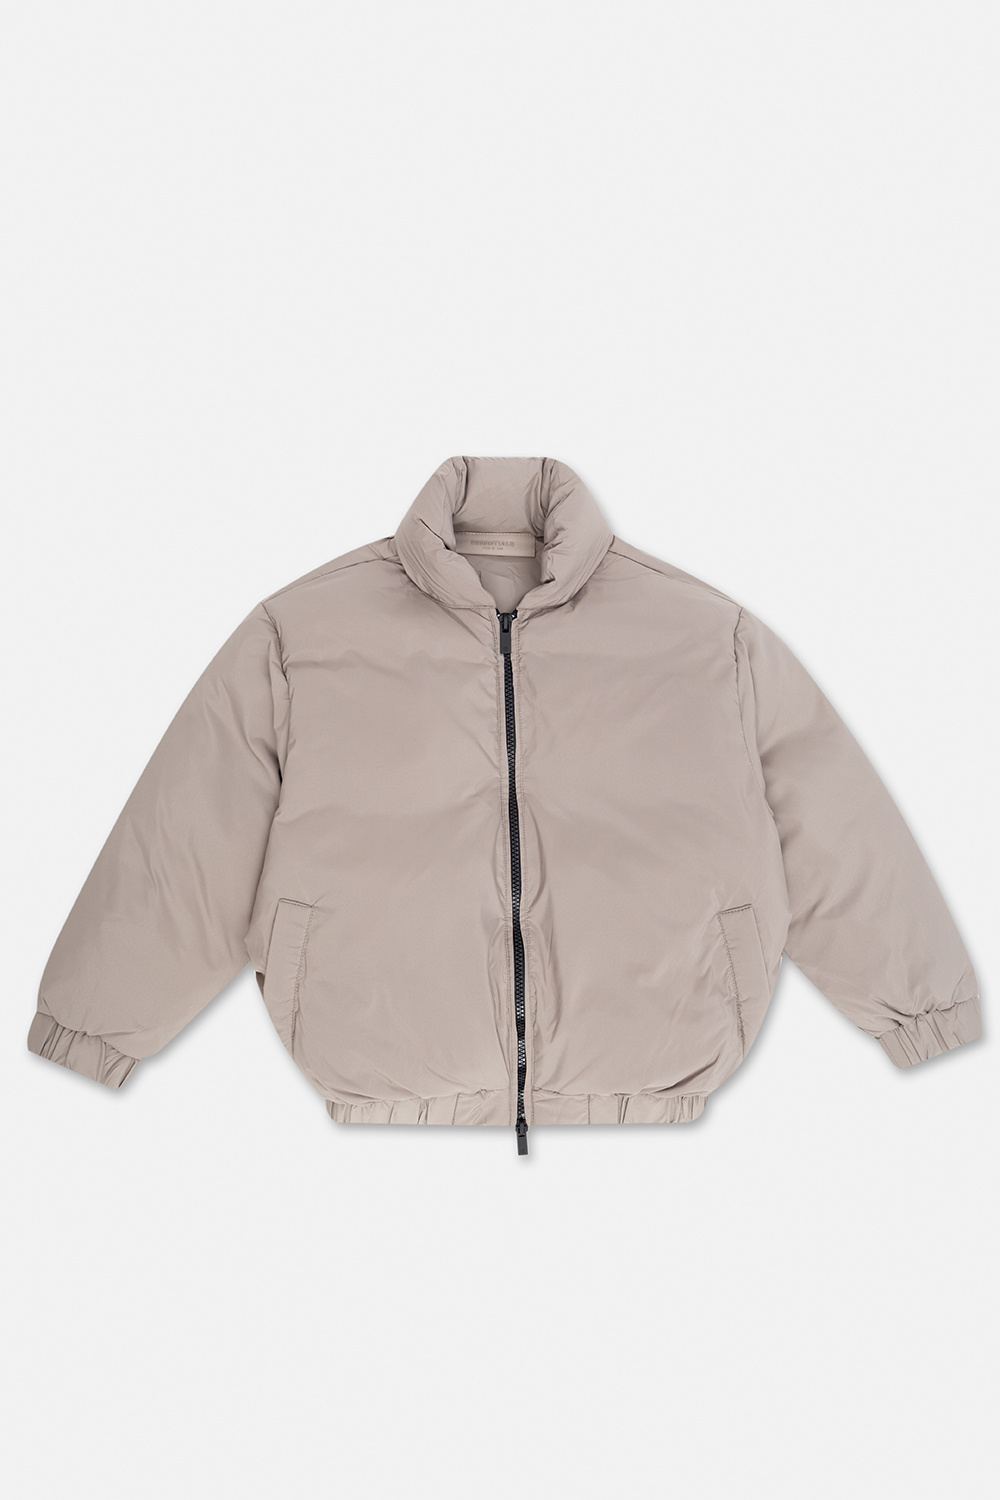 Fear Of God Essentials Kids Insulated jacket